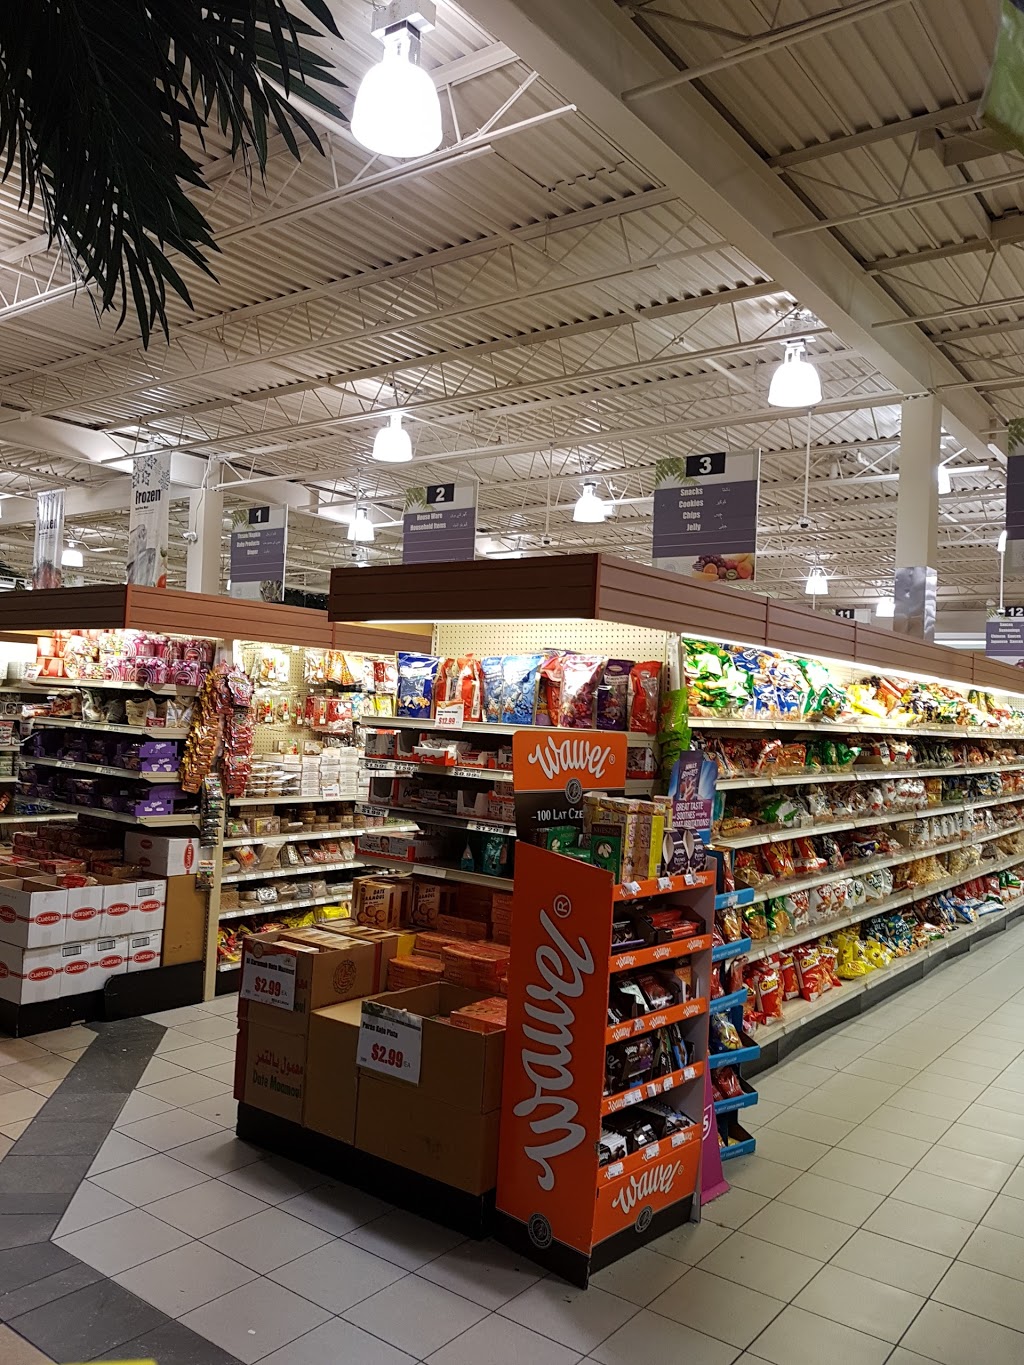 Sunny Foodmart | store | 747 Don Mills Rd #60, North York, ON M3C 1T2, Canada | 4169001699 OR +1 416-900-1699